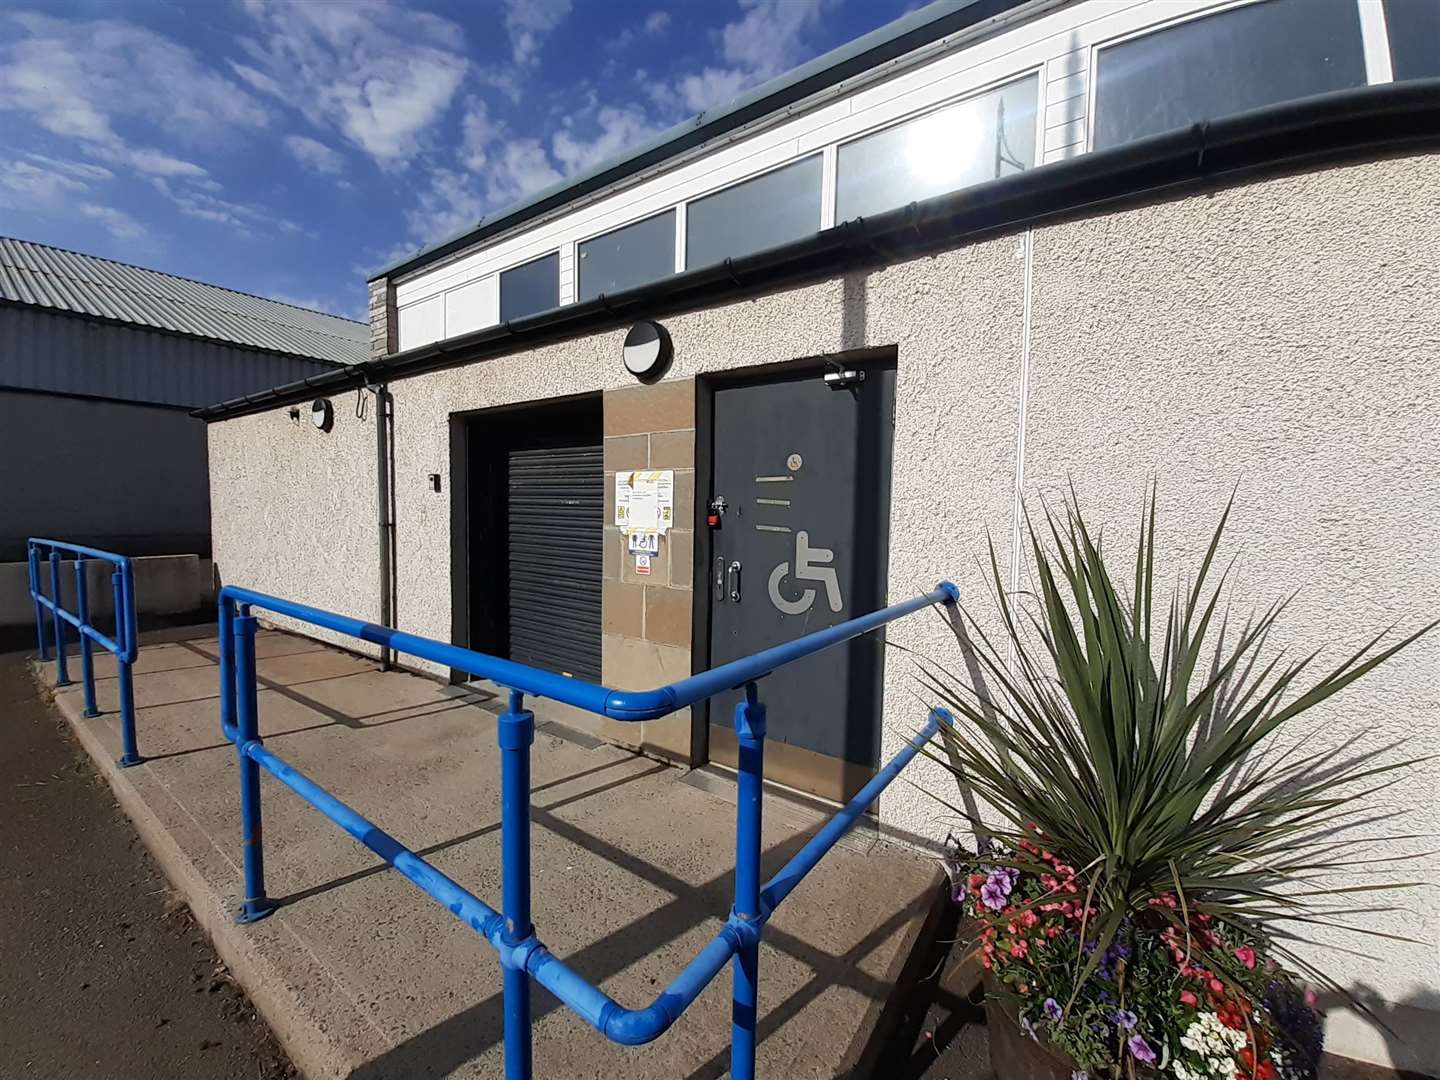 The closed Riverside toilets in Thurso will be re-opened with new locks and CCTV.